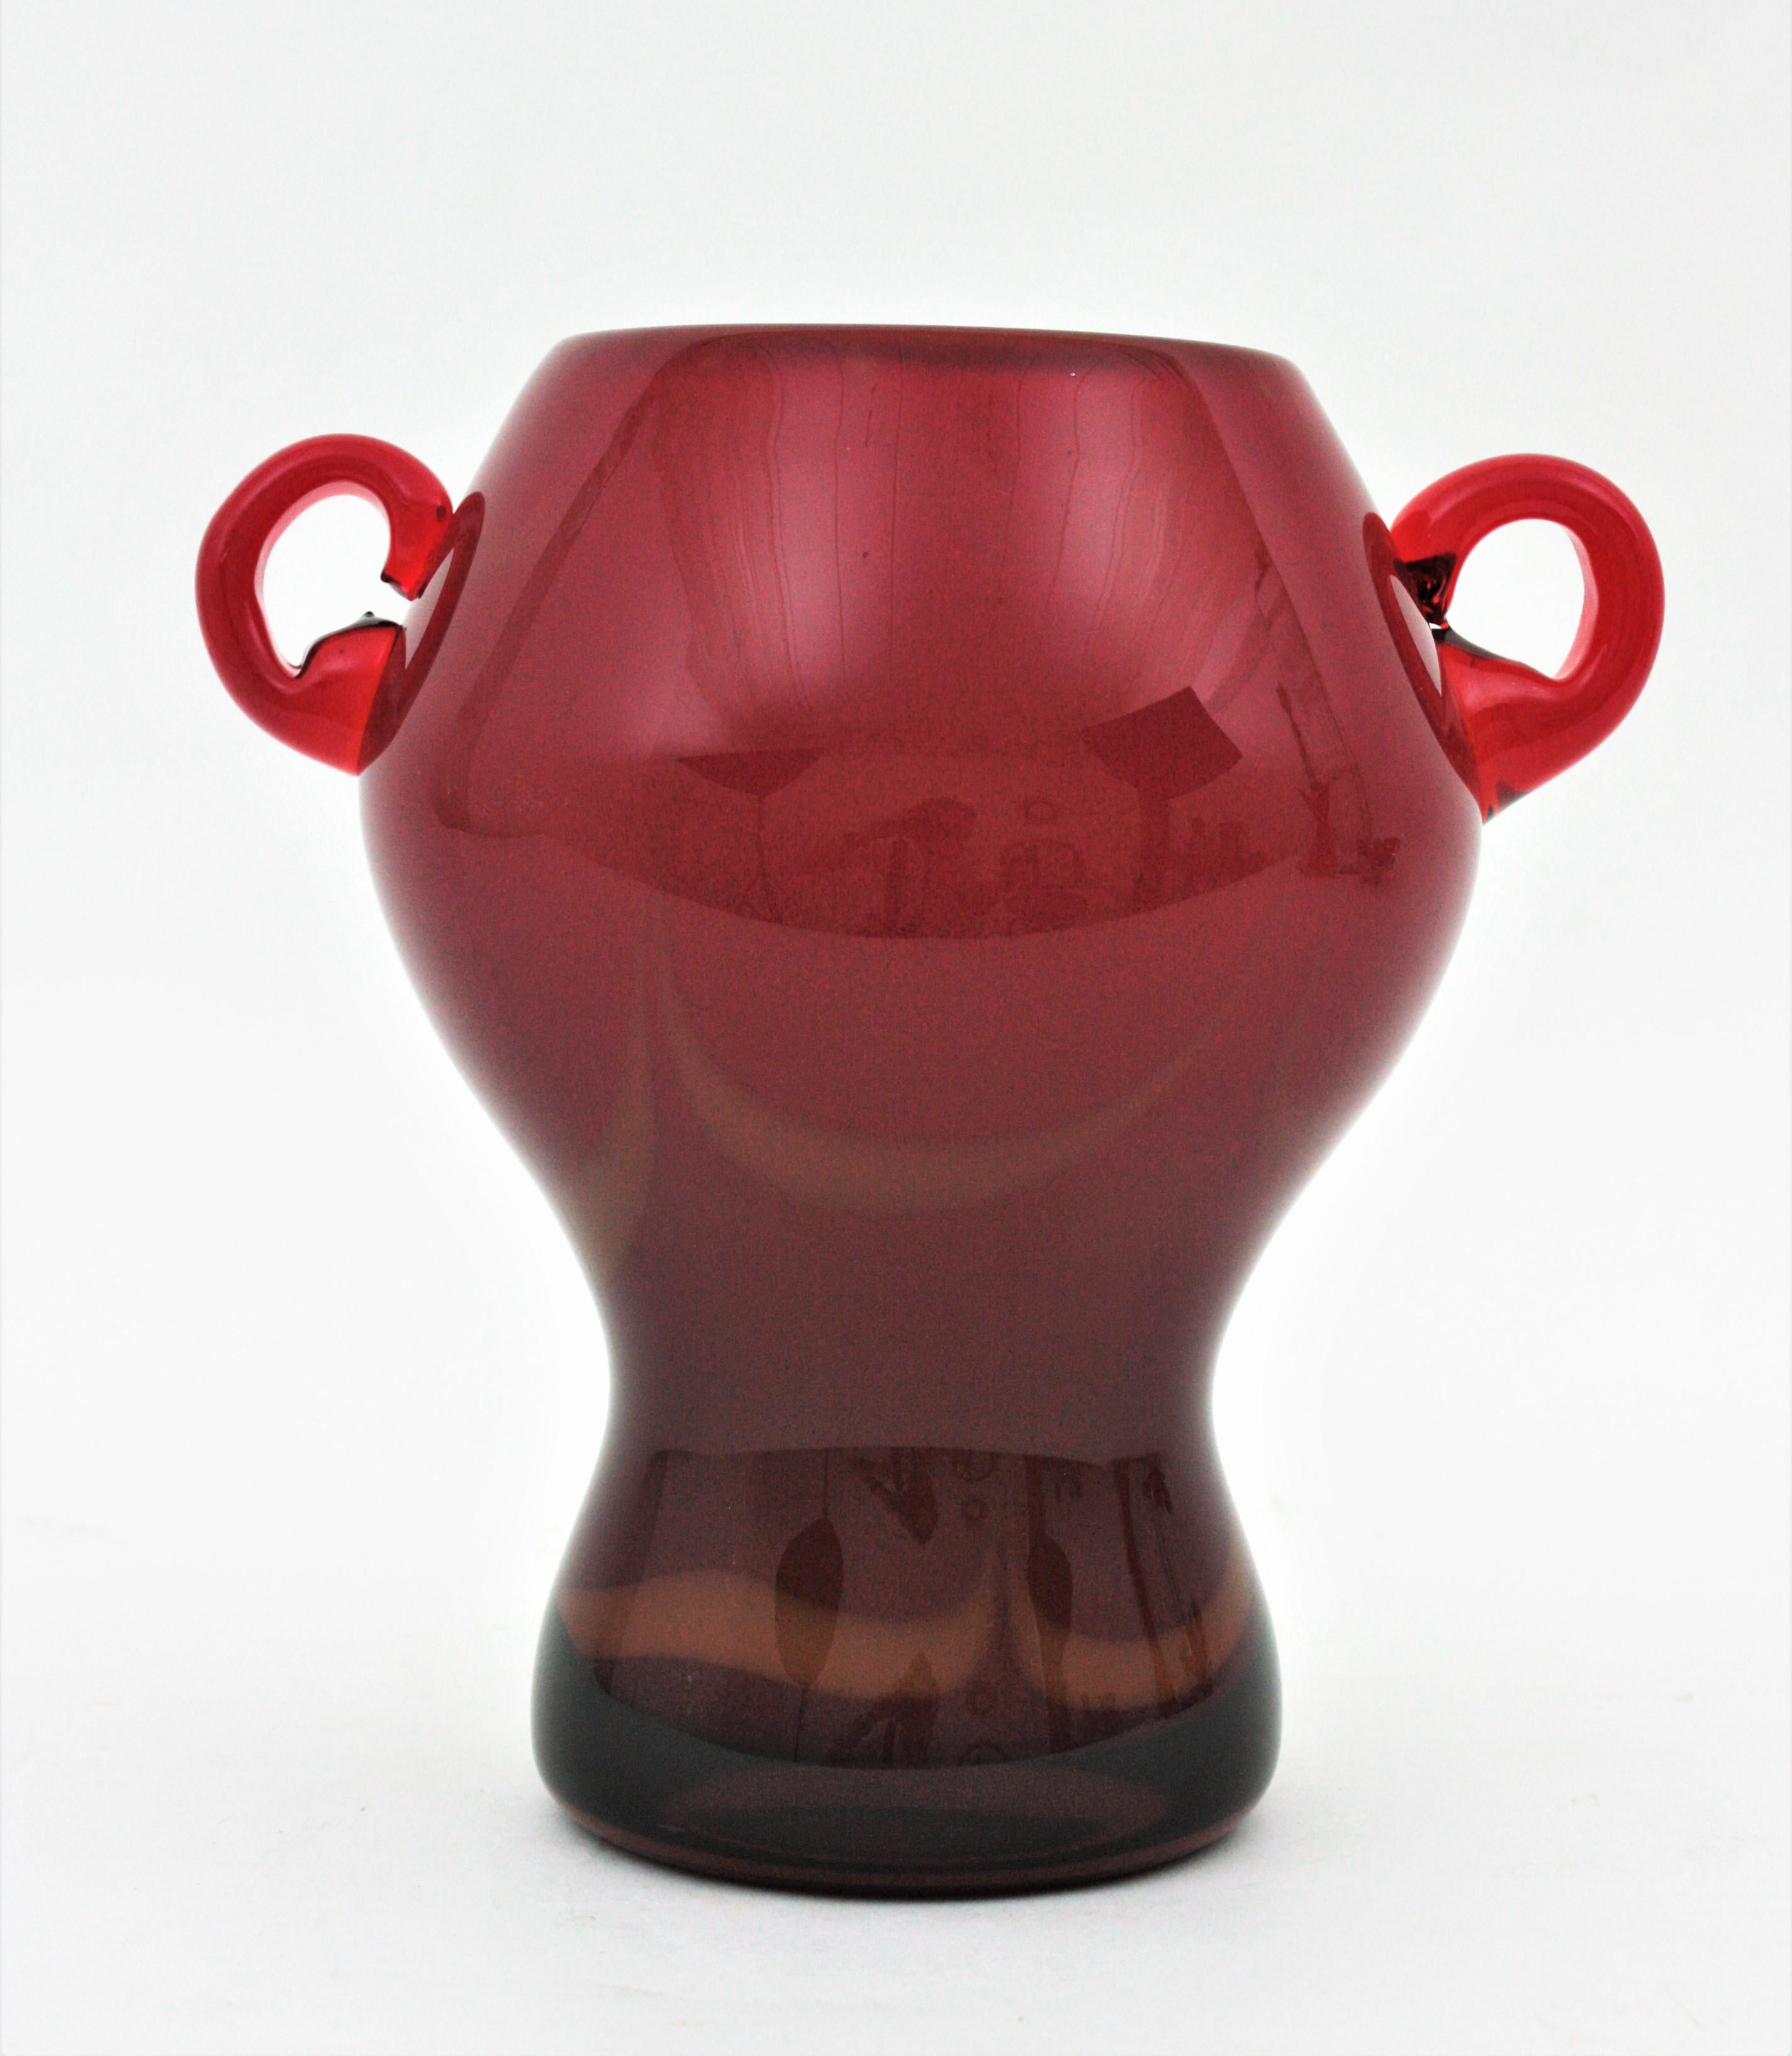 Italian Archimede Seguso Red Toffee Art Glass Vase with Handles, Italy, 1950s For Sale